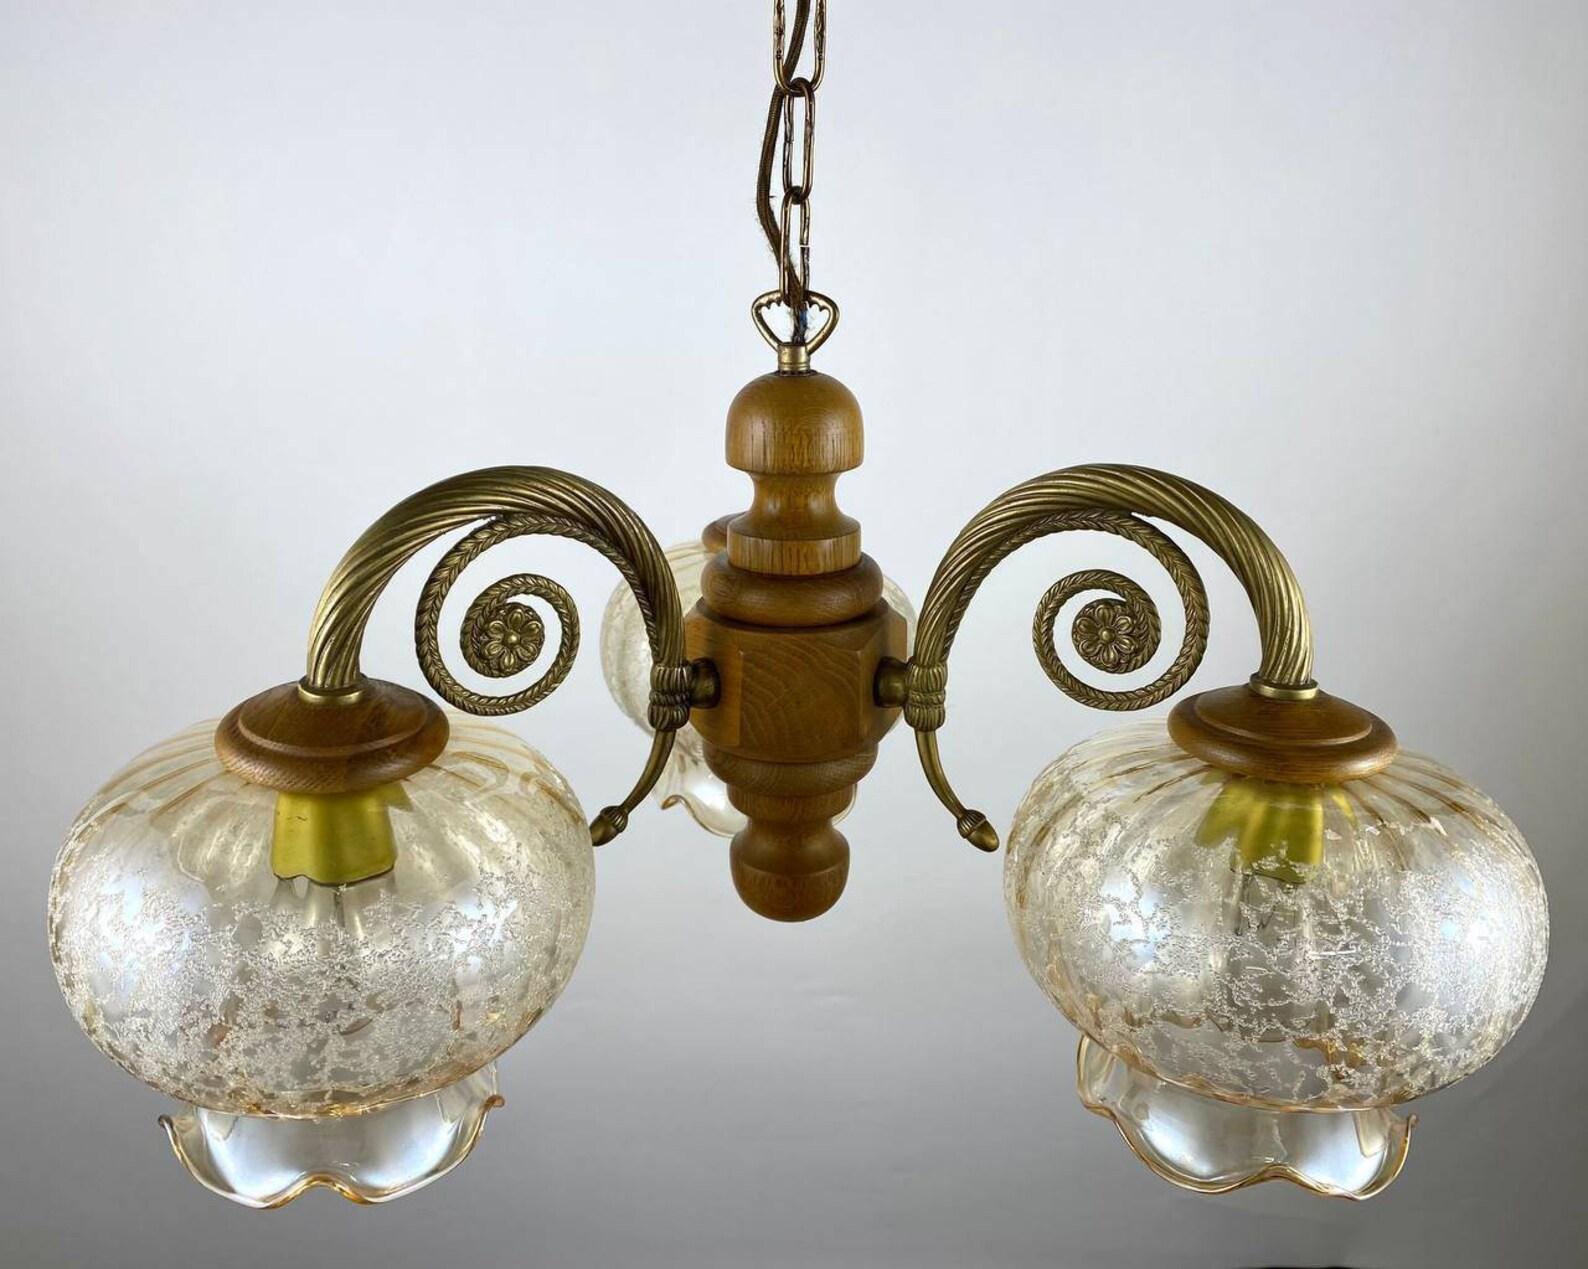 Vintage Chandelier of classical style from the Belgium Manufactory. Circa 1980s. 

Beautiful Chandelier with 3 light points is the quality in every detail of the lighting fixture. 

The brass and wooden fittings looks solid and frosted glass